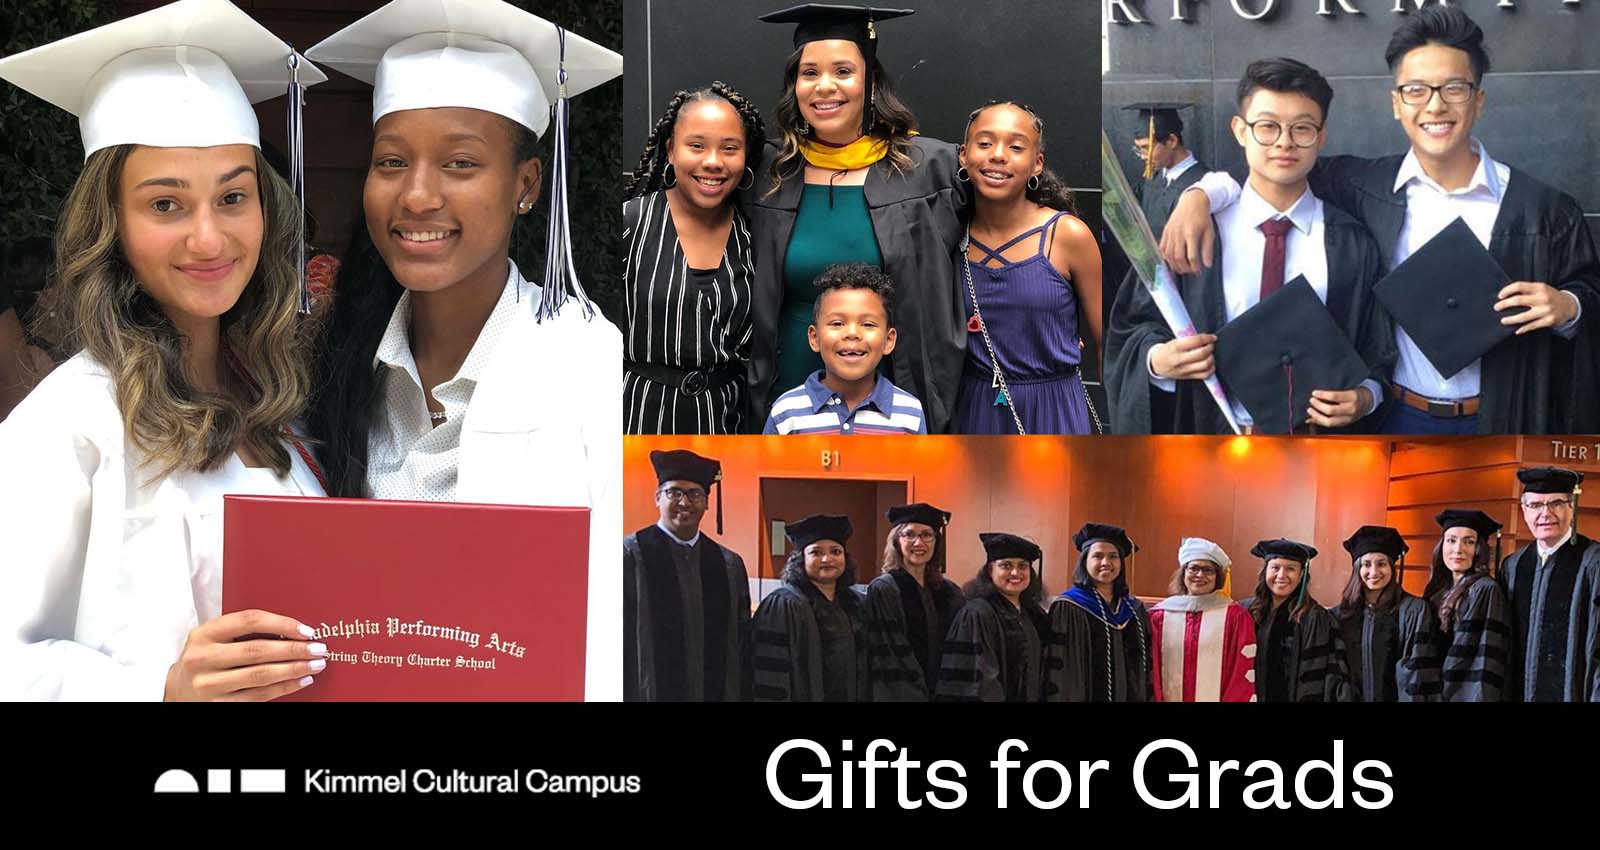 Photos of graduates of all ages in their cap and gown above a black banner with the Kimmel Cultural Campus logo and text reading Gifts for Grads